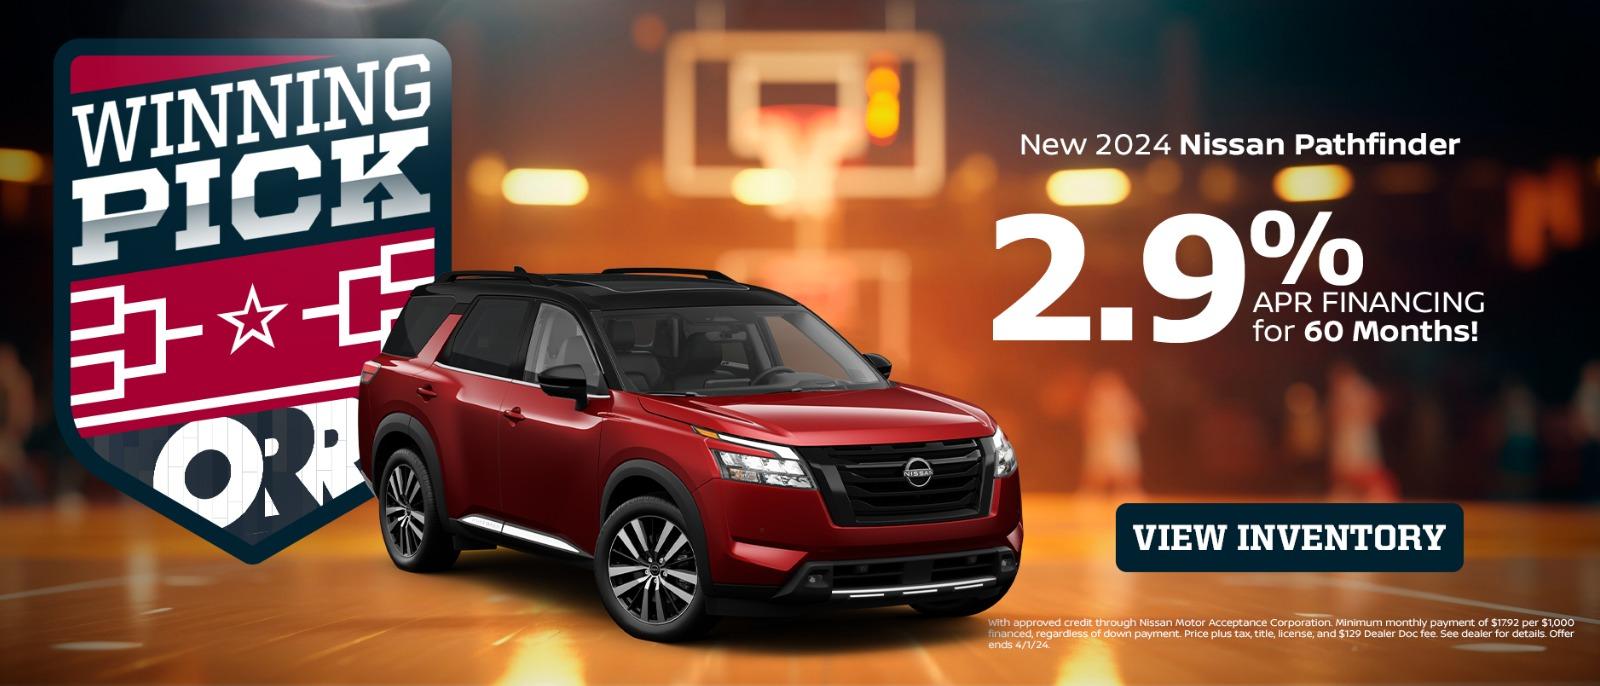 New 2024 Nissan Pathfinder
2.9% APR Financing for 60 months